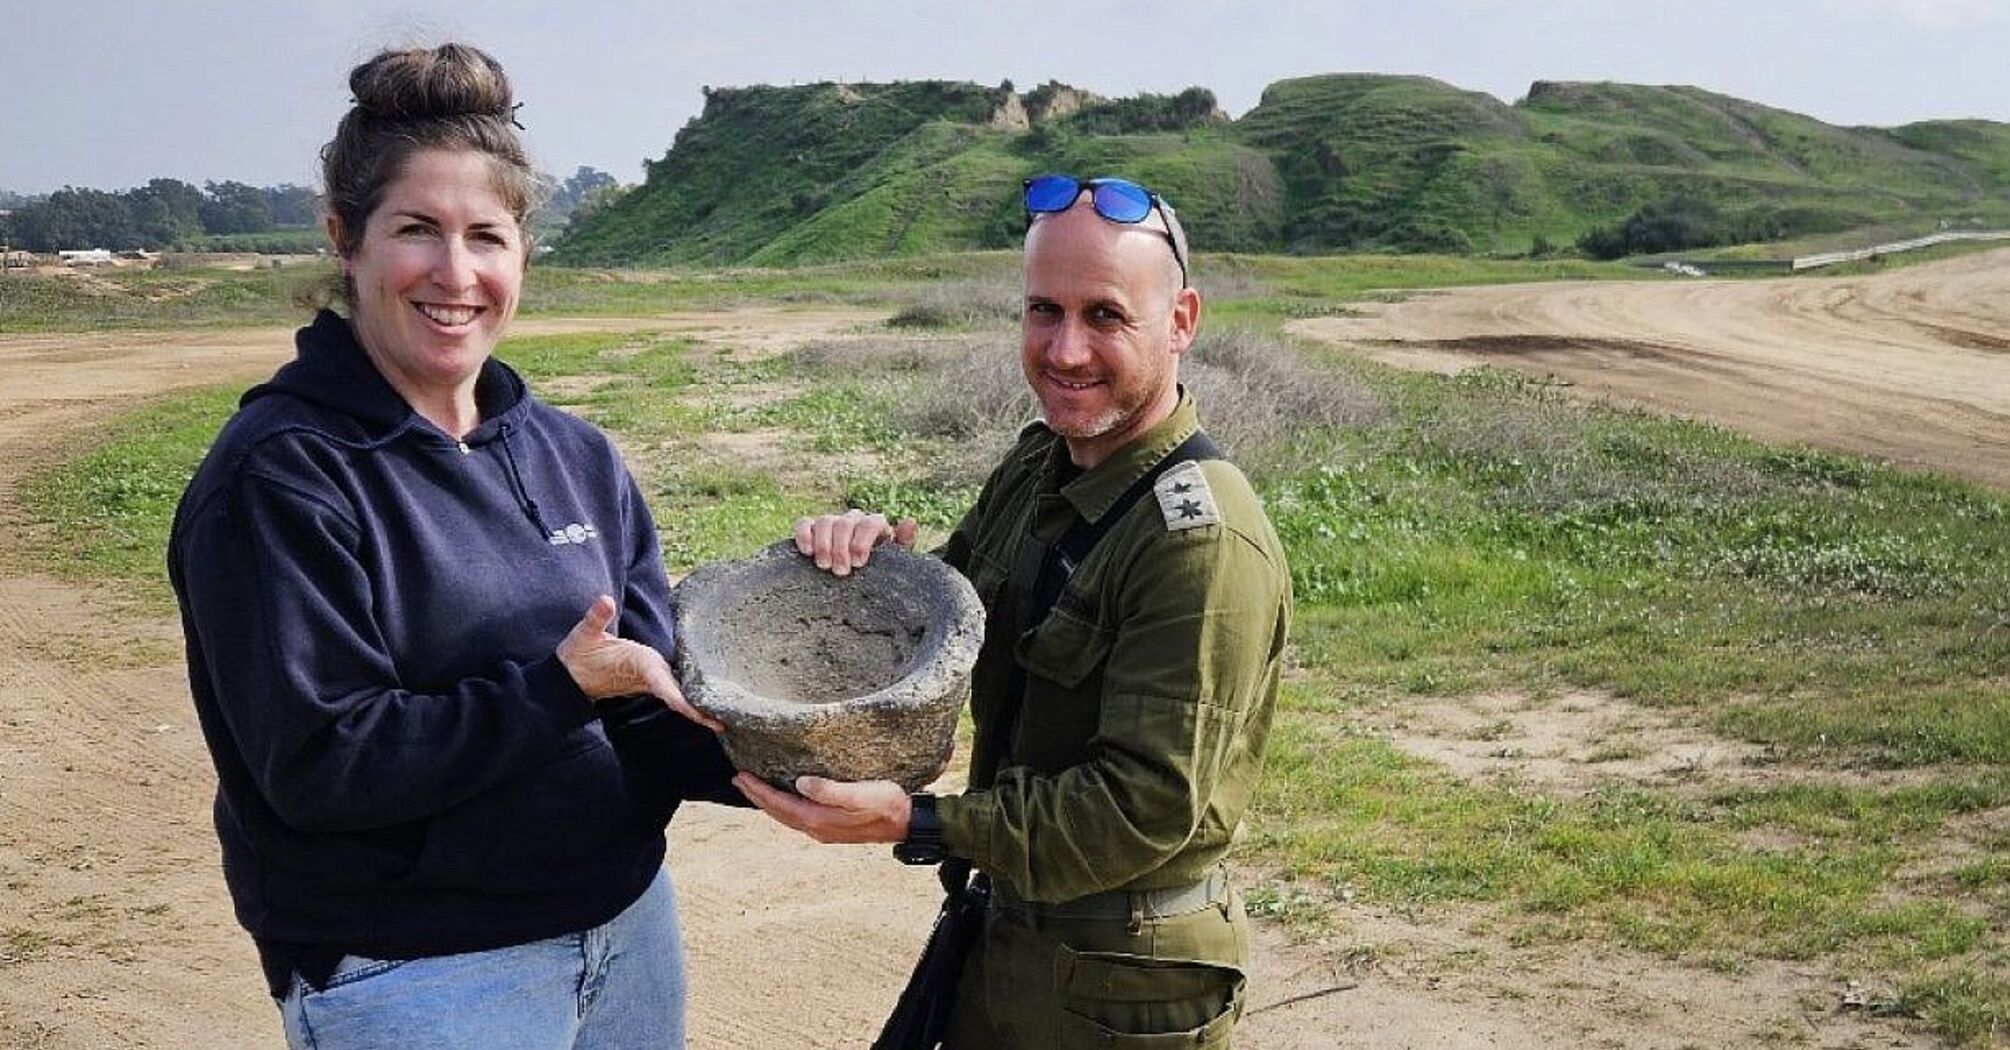 Israeli soldiers accidentally stumble upon a valuable artifact while patrolling the Gaza Strip (photo)